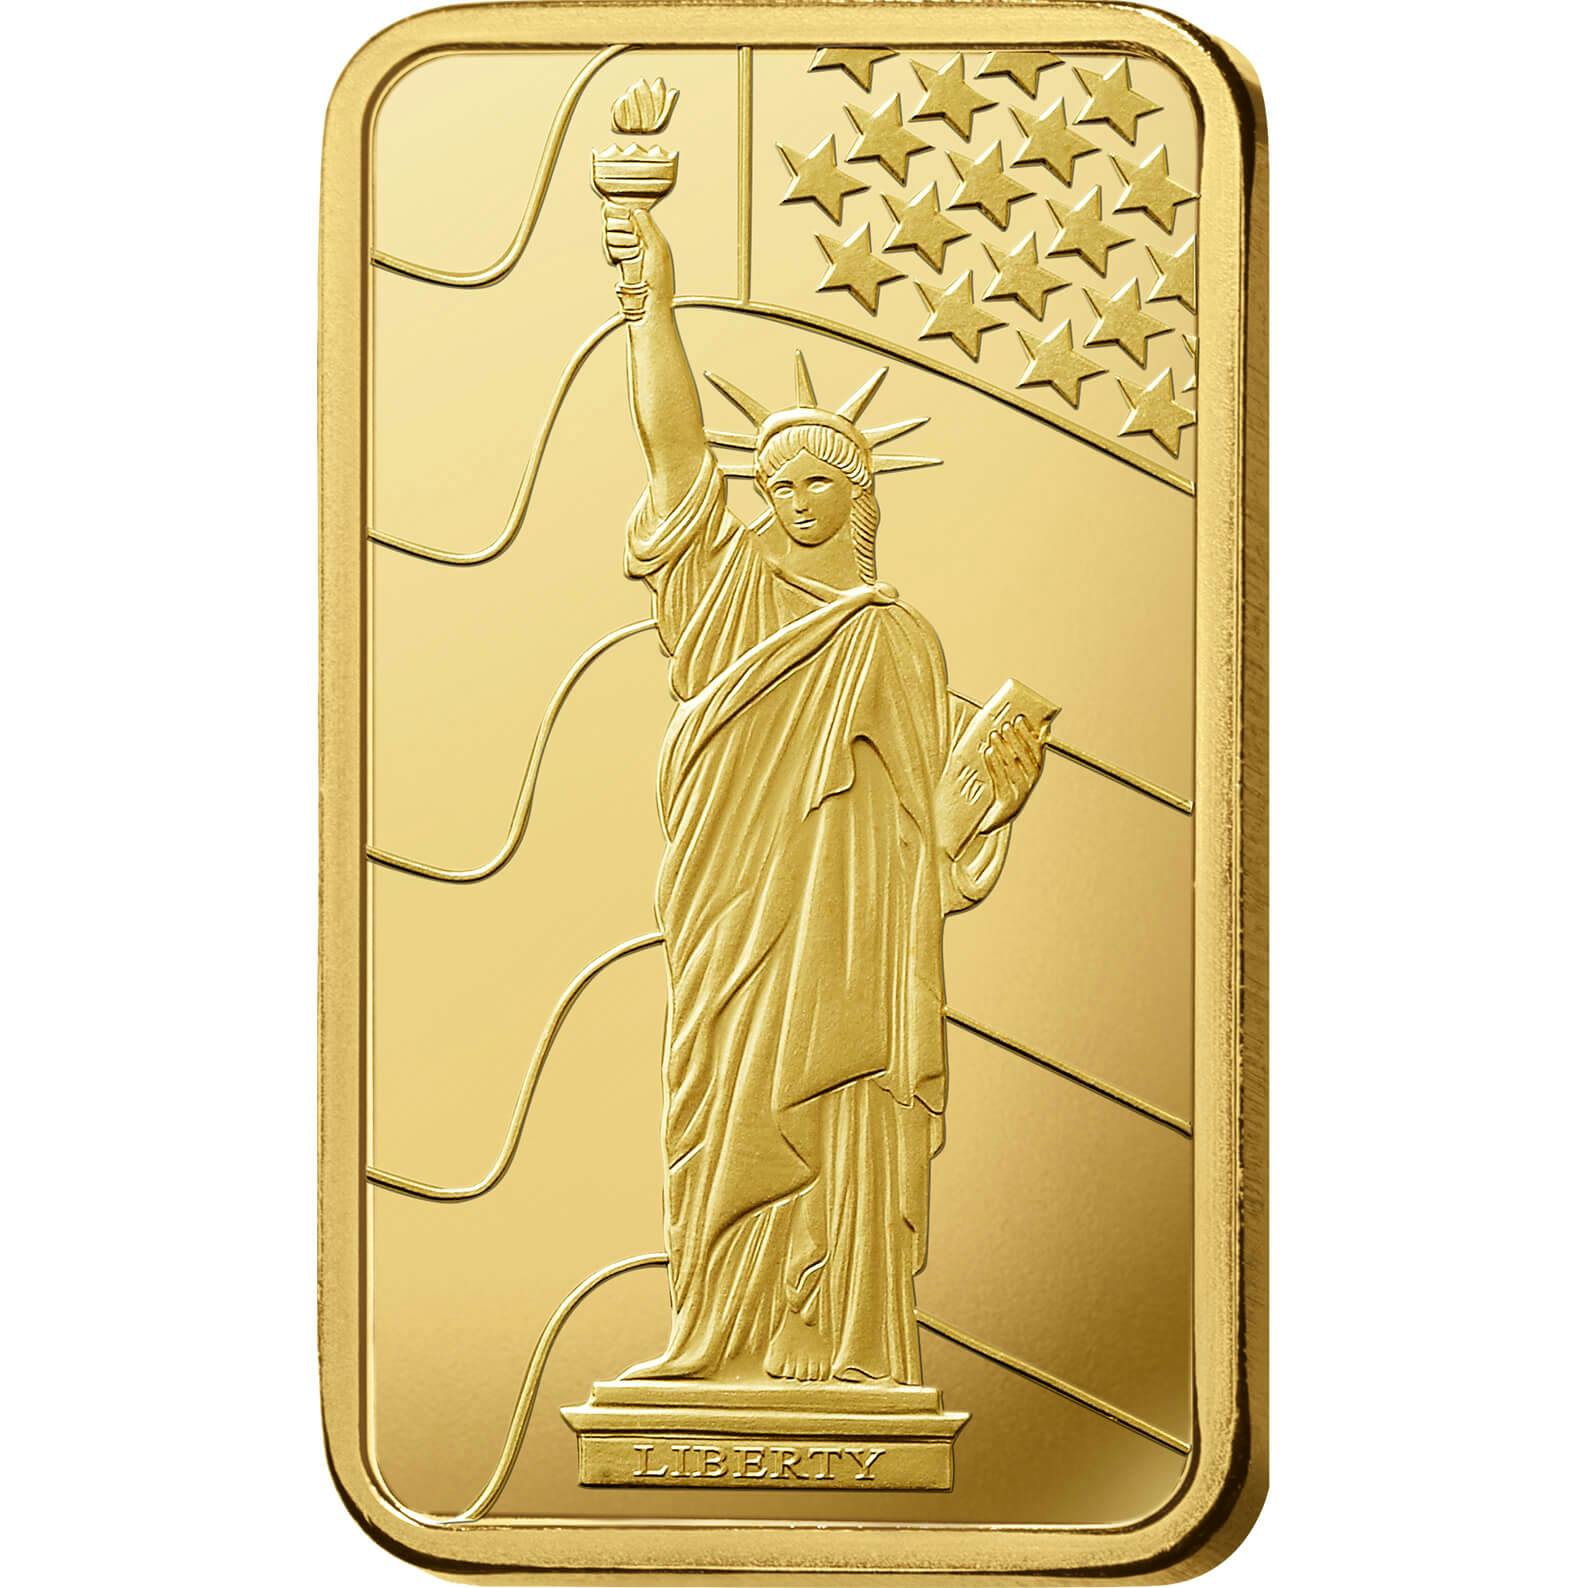 Achat d'or, 100 gram d'or pur Liberty - PAMP Suisse - Front 